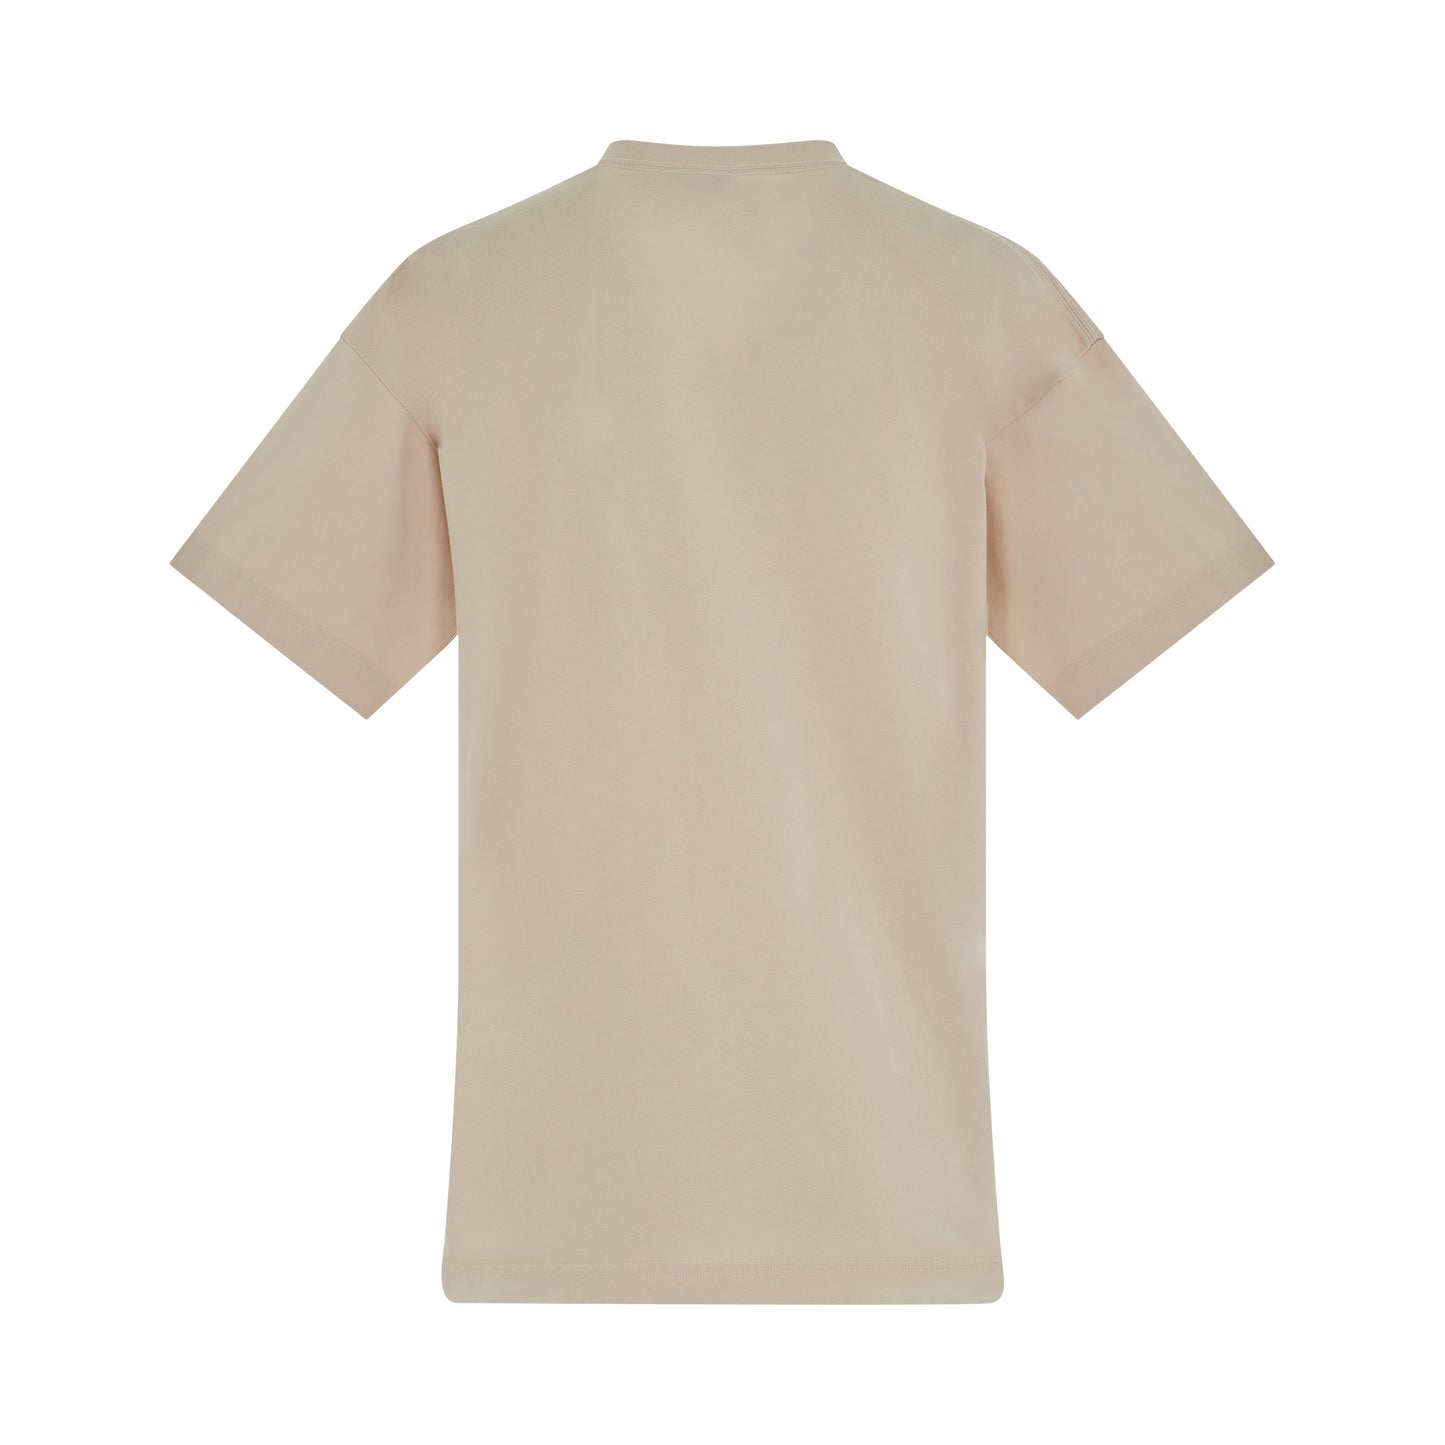 Retail Therapy Medium Fit T-Shirt in Chalky